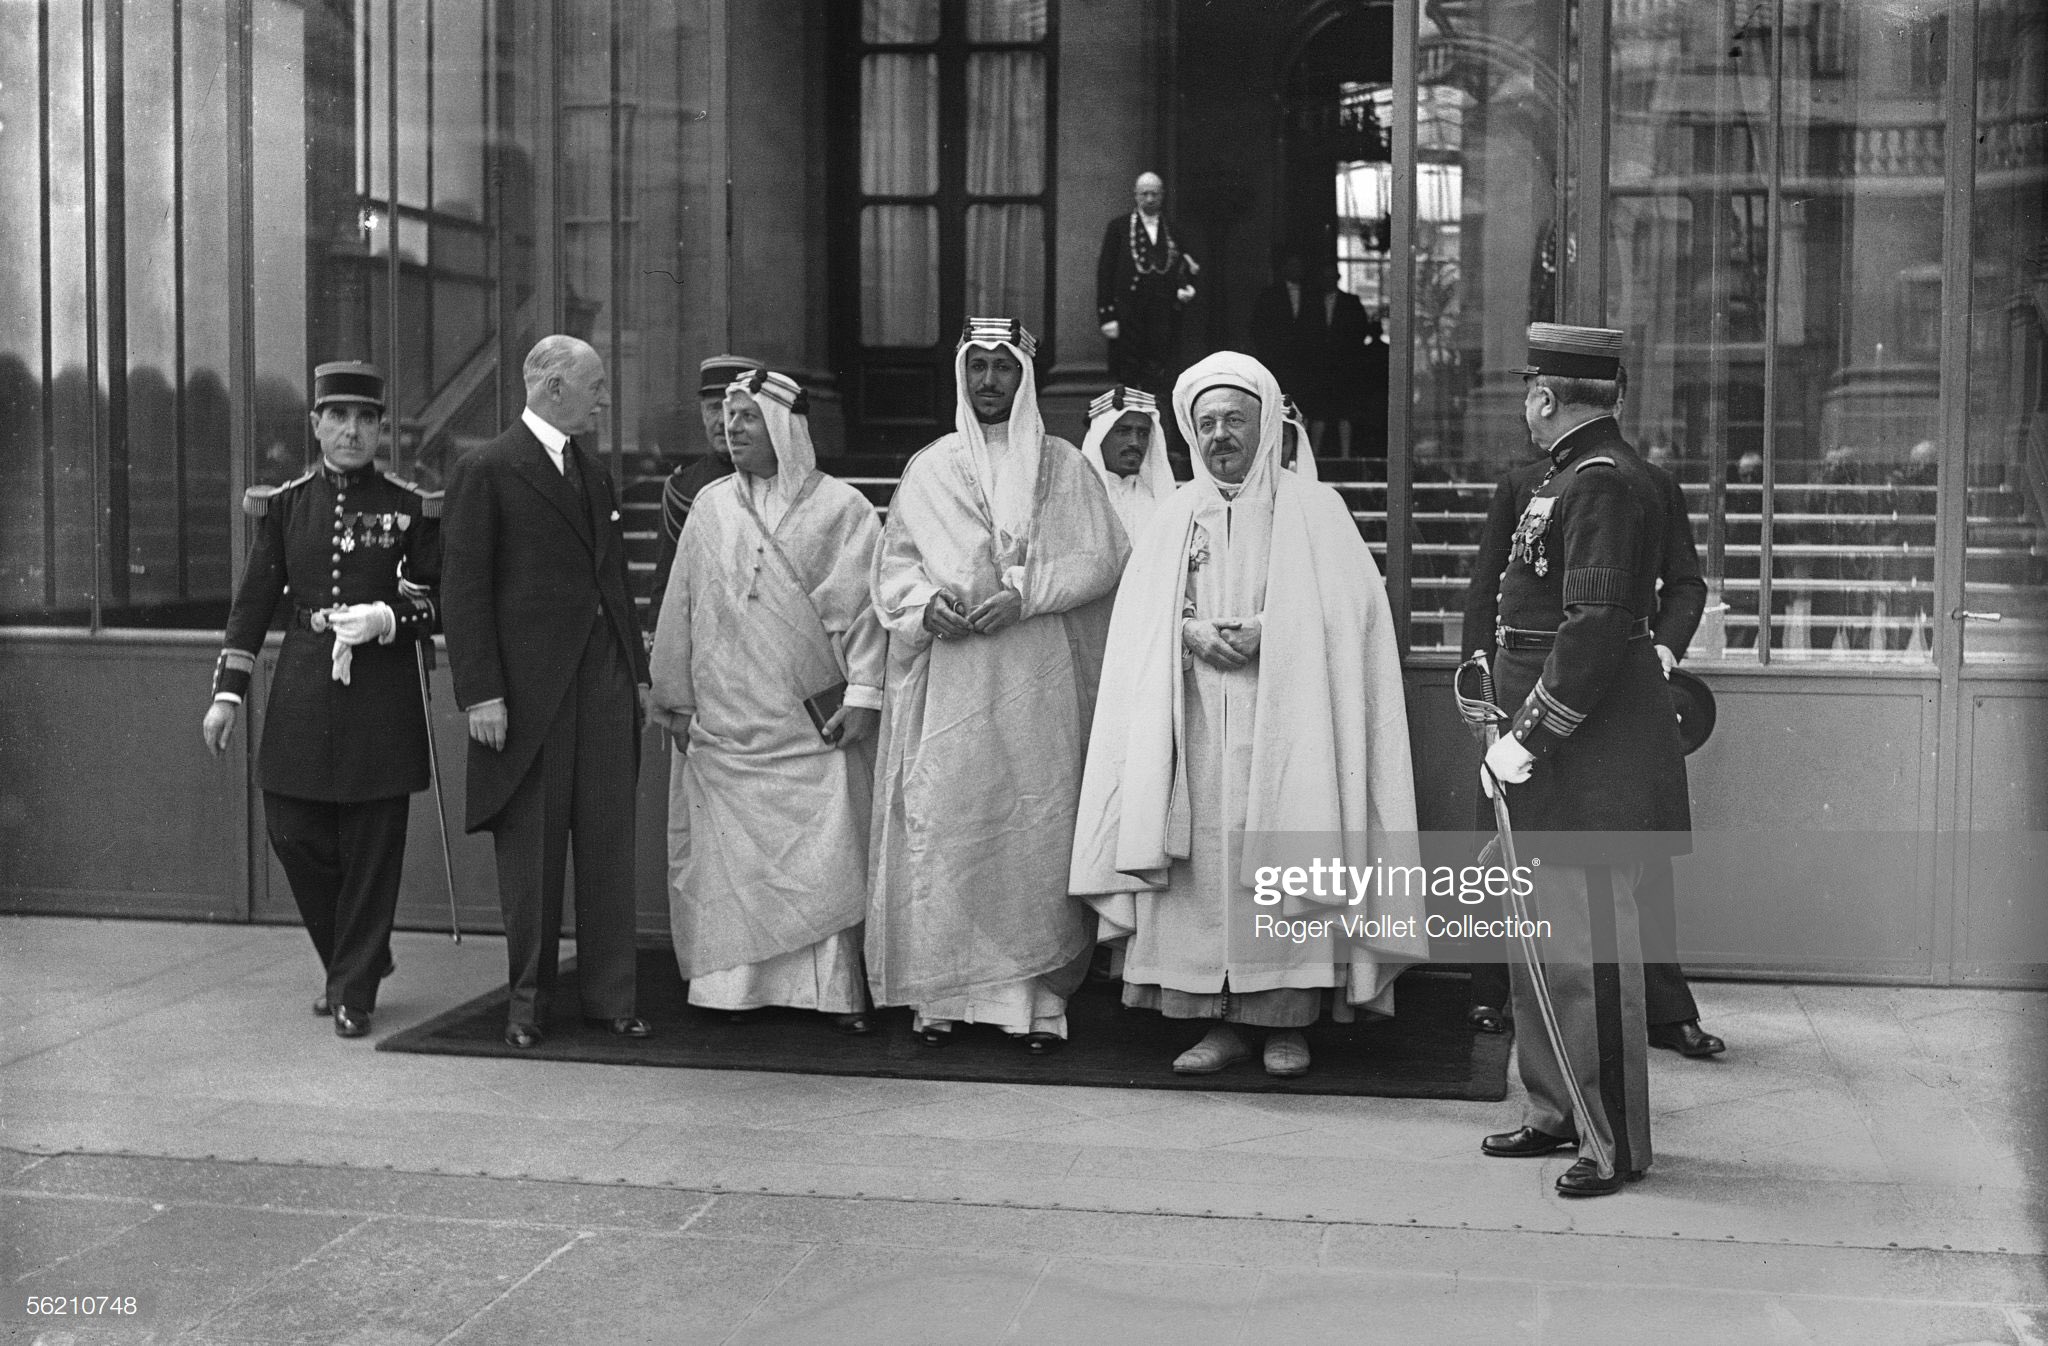 Crown prince Saud /king Saud ,in 1935, at the Elysee Palace. On the left : Andre de Fouquieres; on the right : Si Kaddour Ben Ghabrit, plenipotentiary minister of Morocco, as interpreter. Paris, 1935.